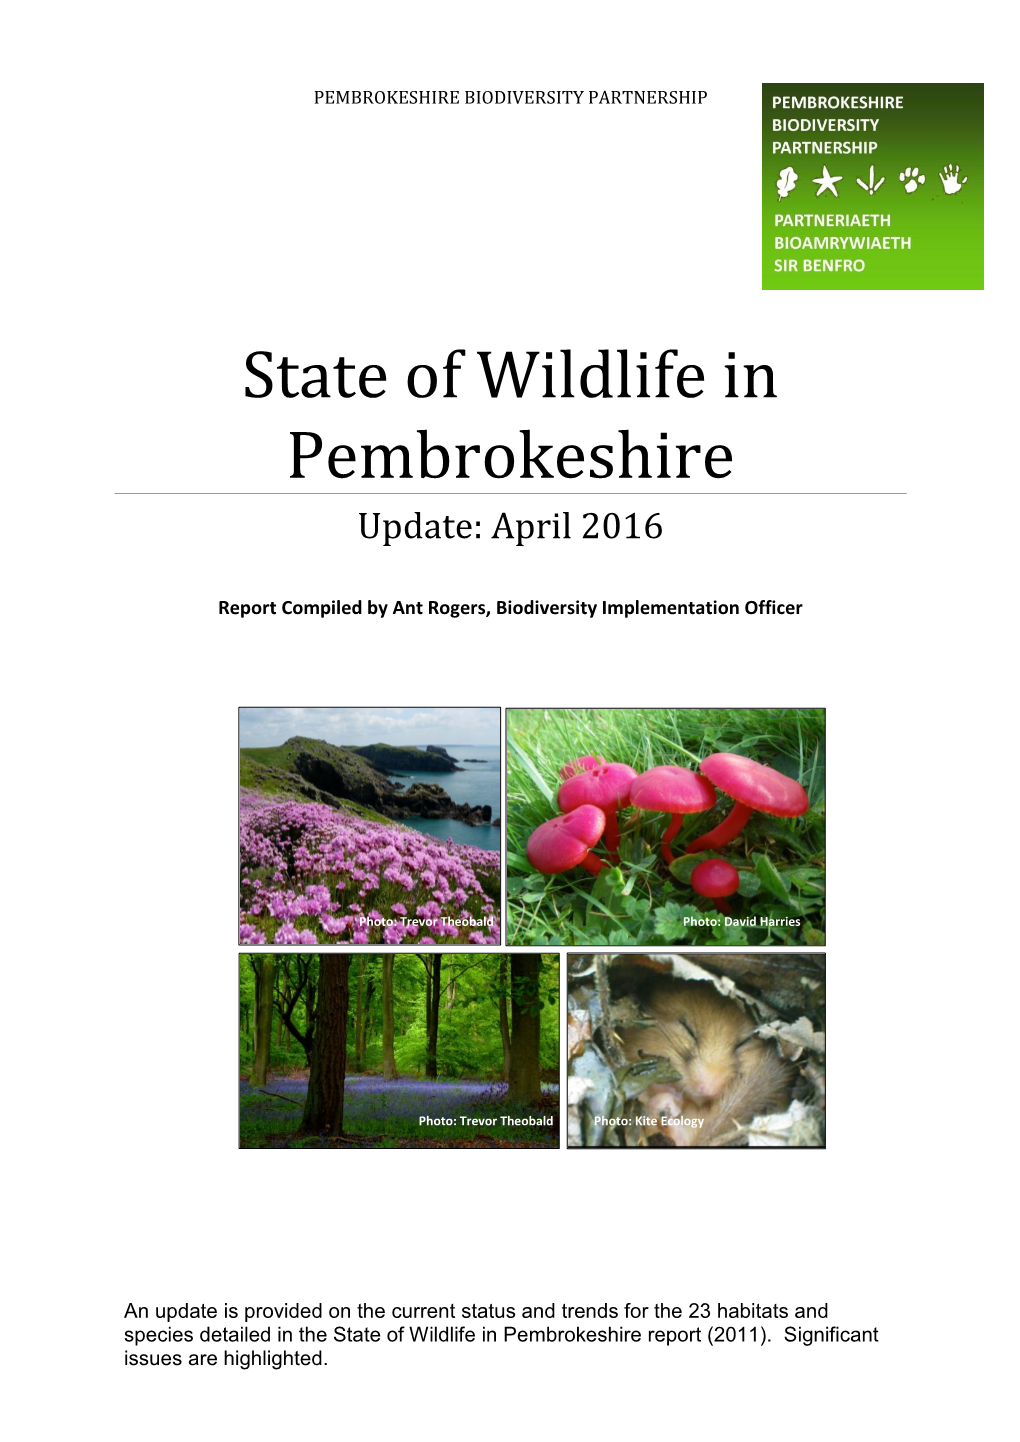 State of Wildlife in Pembrokeshire Update: April 2016